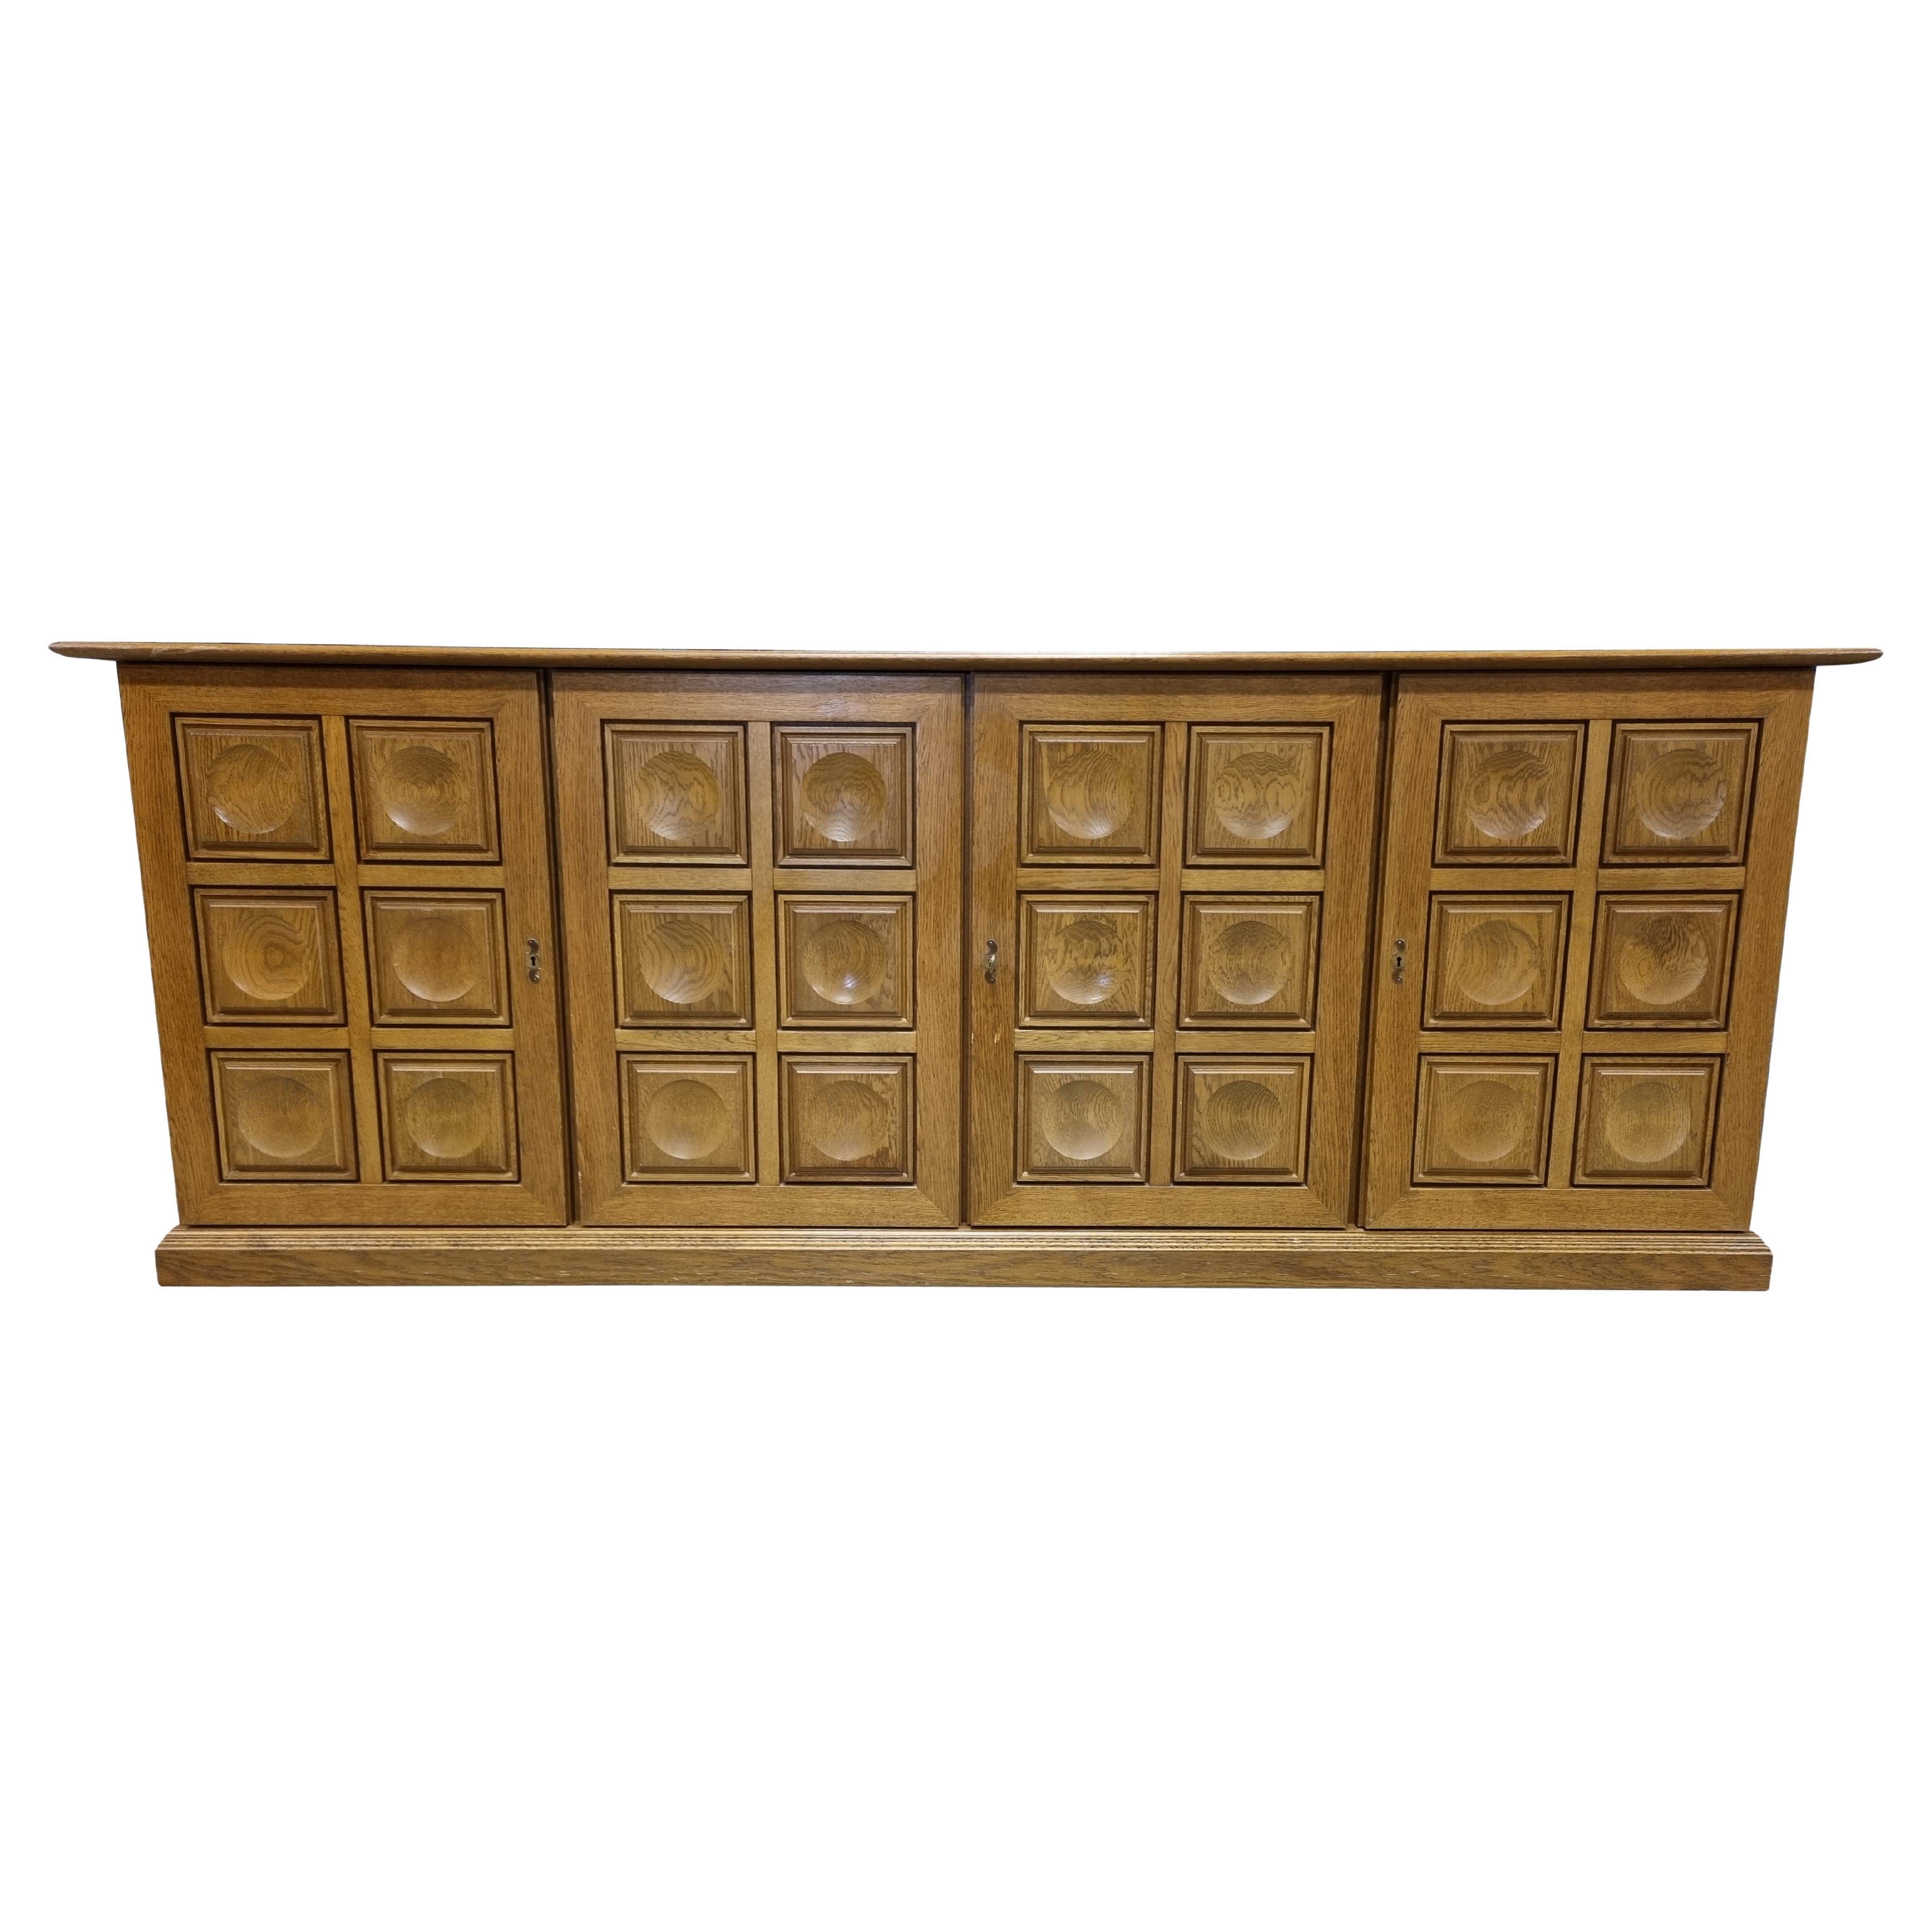 Graphical Brutalist Credenza, 1970s